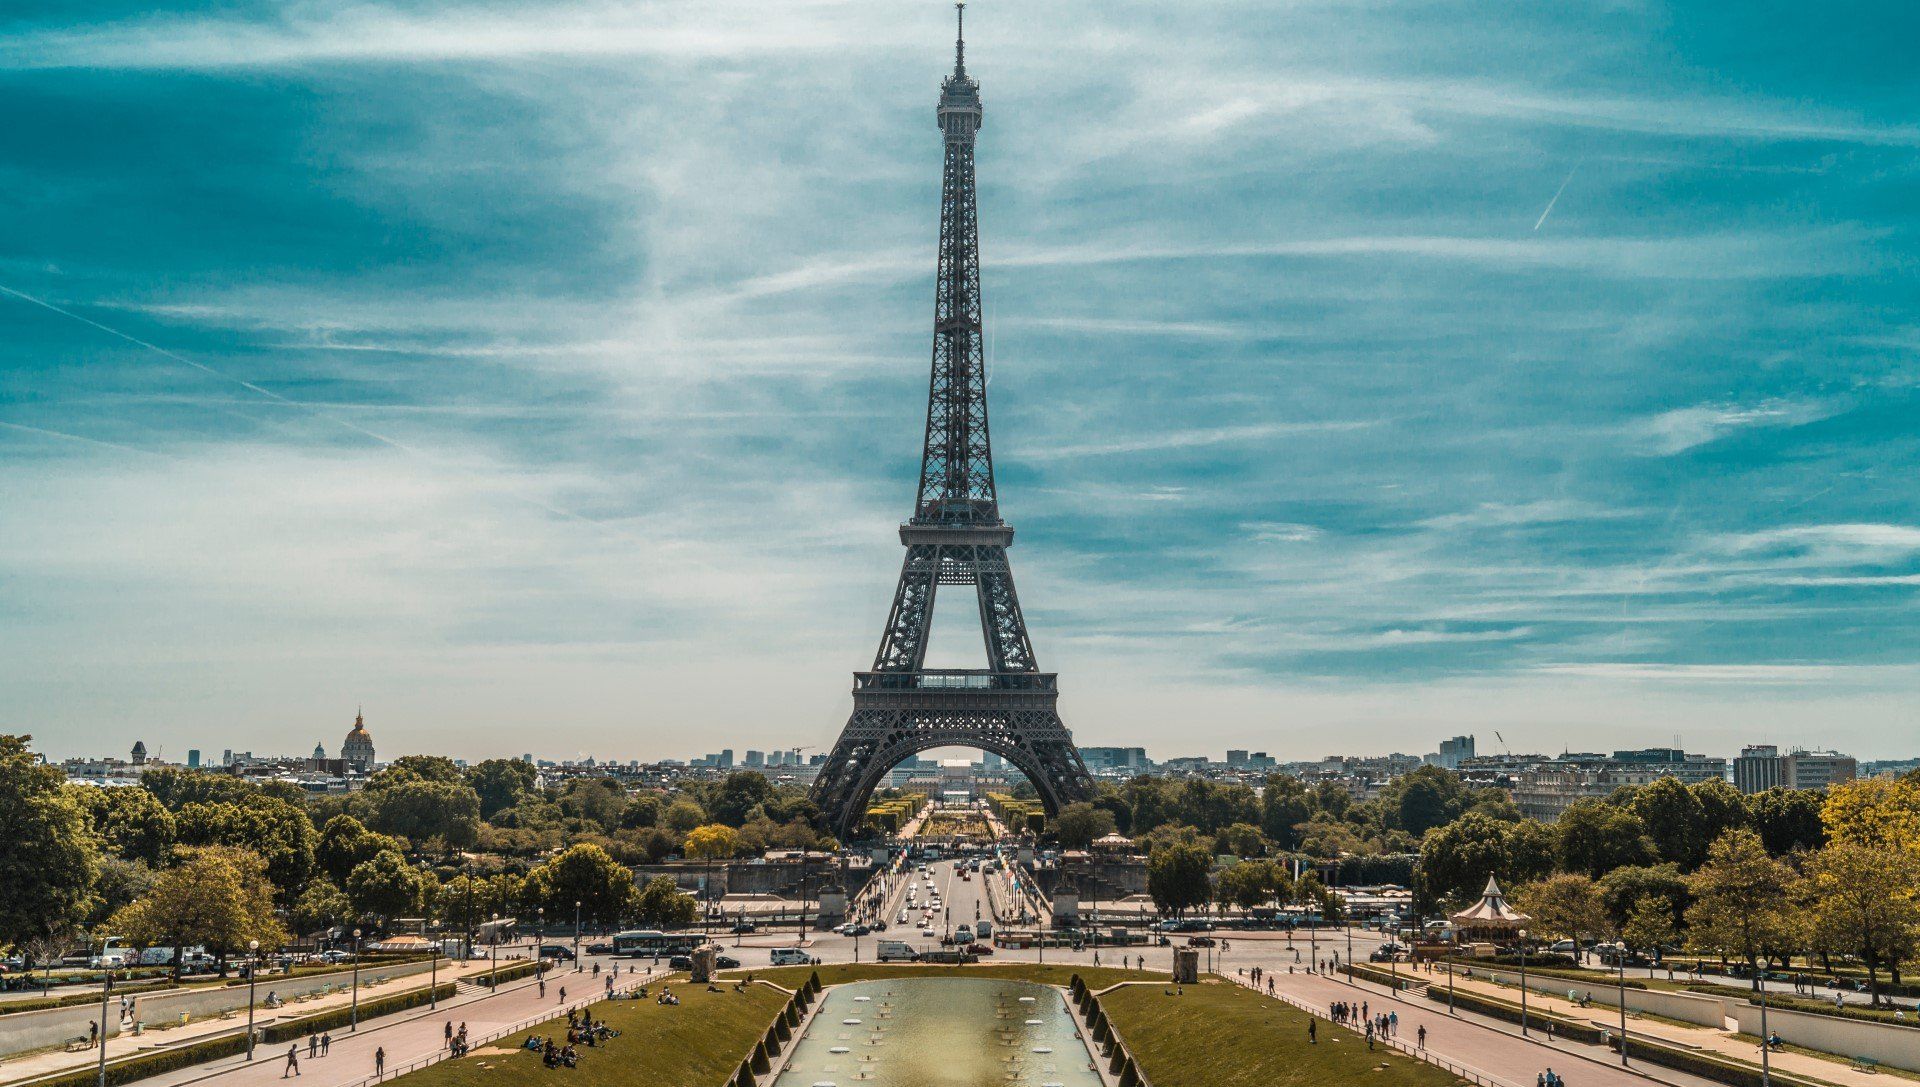 A holiday in Paris wouldn't be complete without a visit to the iconic Eiffel Tower